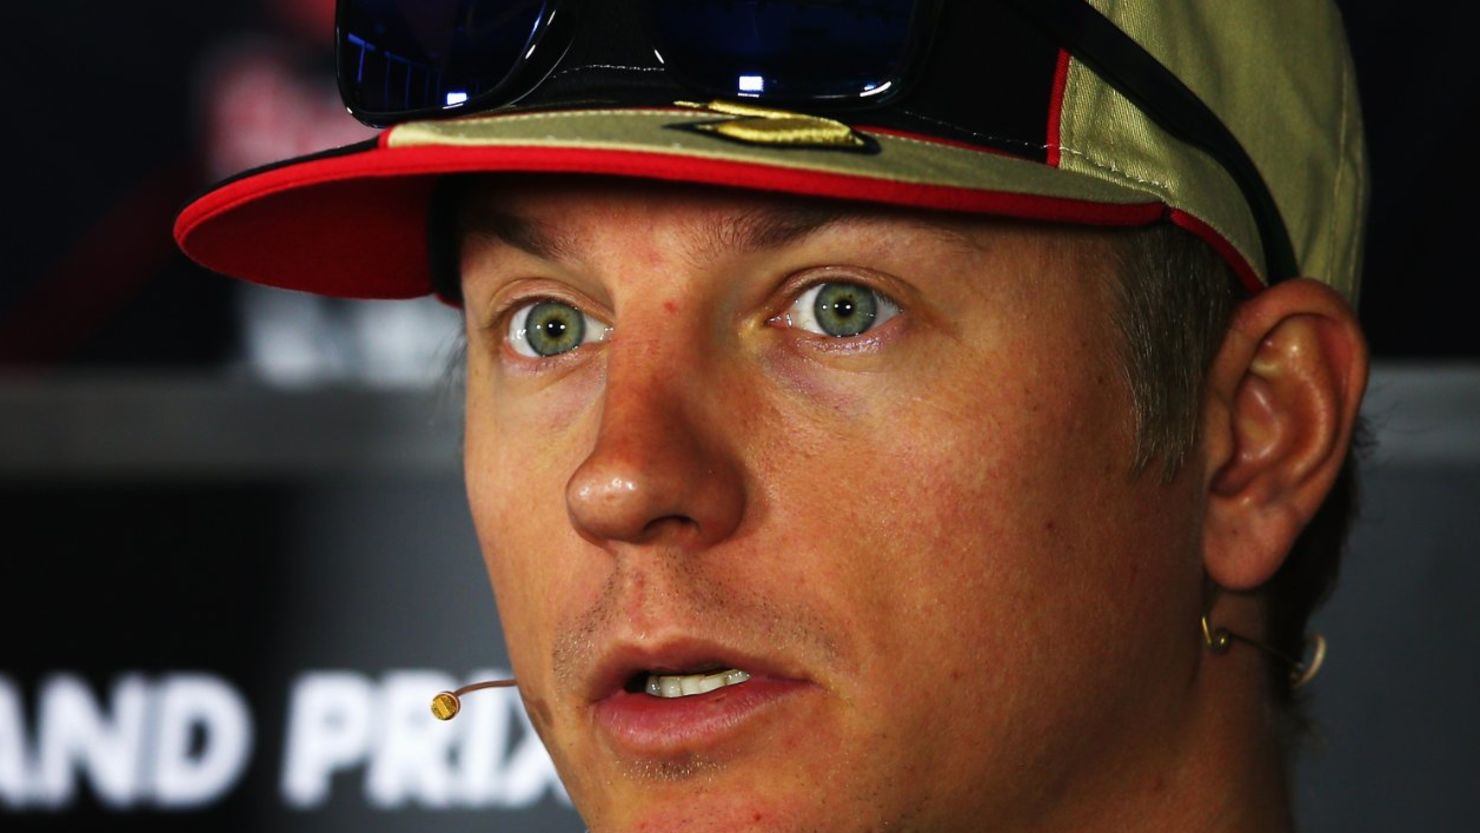 Kimi Raikkonen is at odds with the Lotus team ahead of his move to Ferrari for the 2014 season.